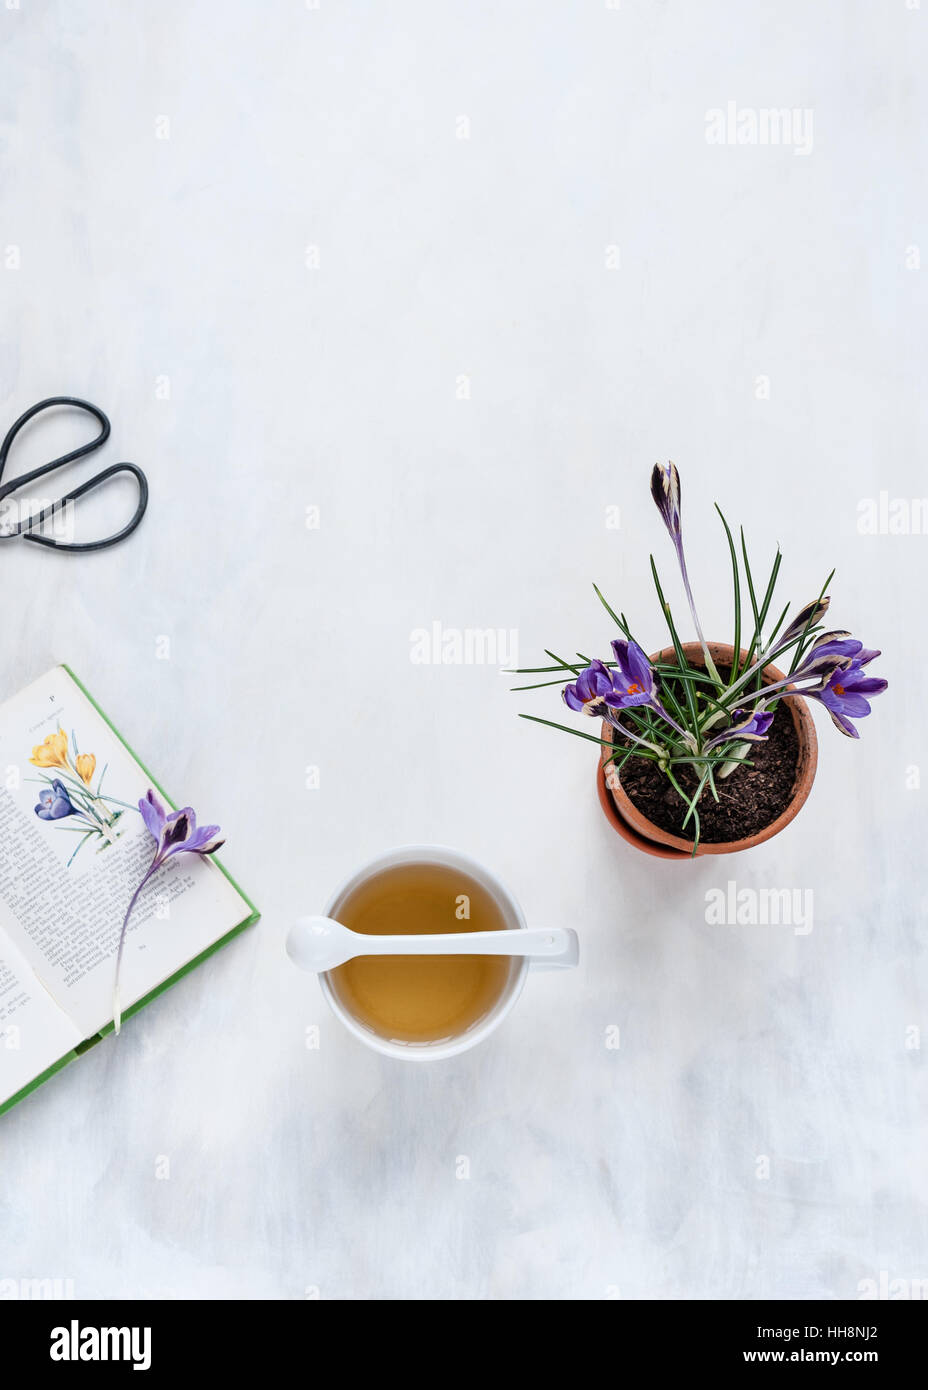 flat lay with potted crocus, open flower book, garden scissors  laid out on white and gray painted backdrop in natural light Stock Photo